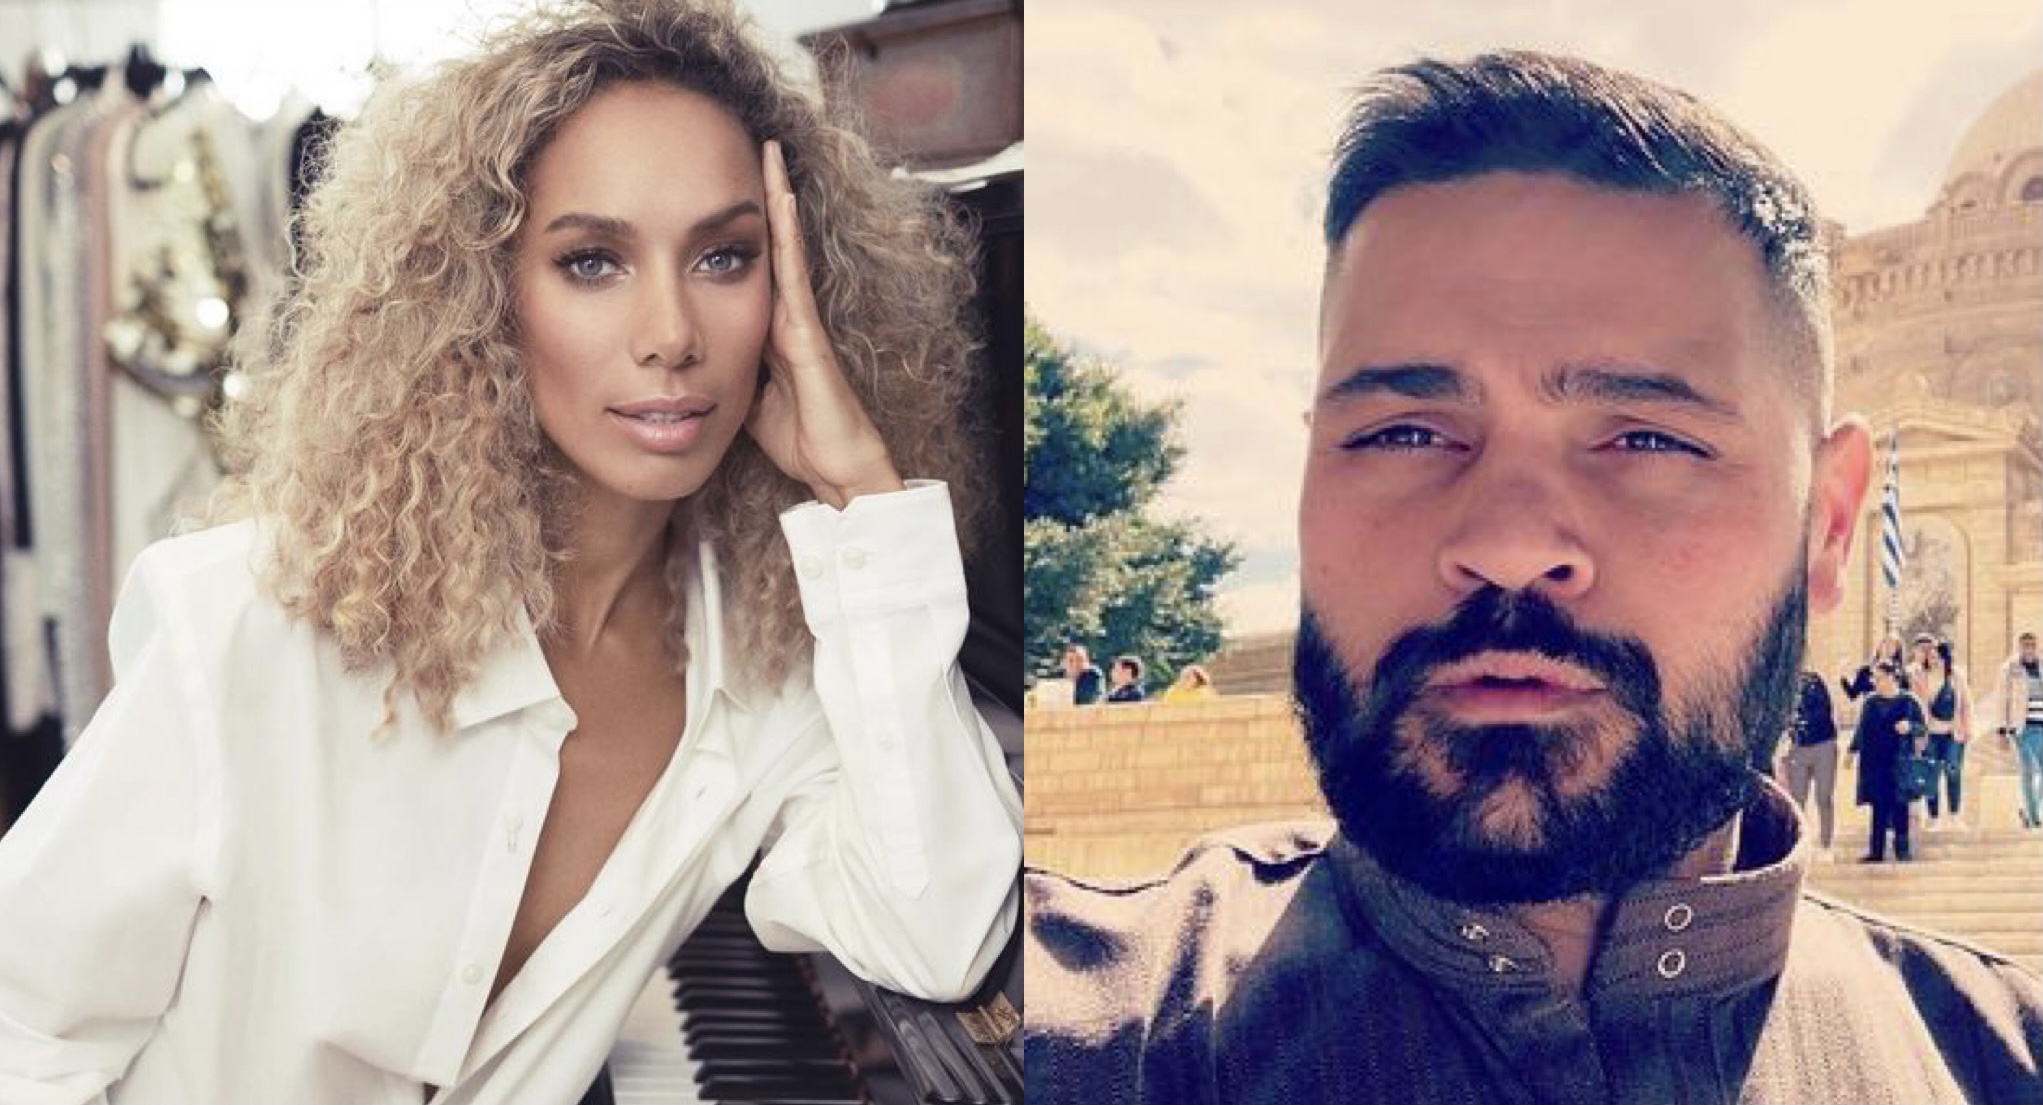 Michael Costello Says He Was 'Blindsided' By Leona Lewis' Claims ...